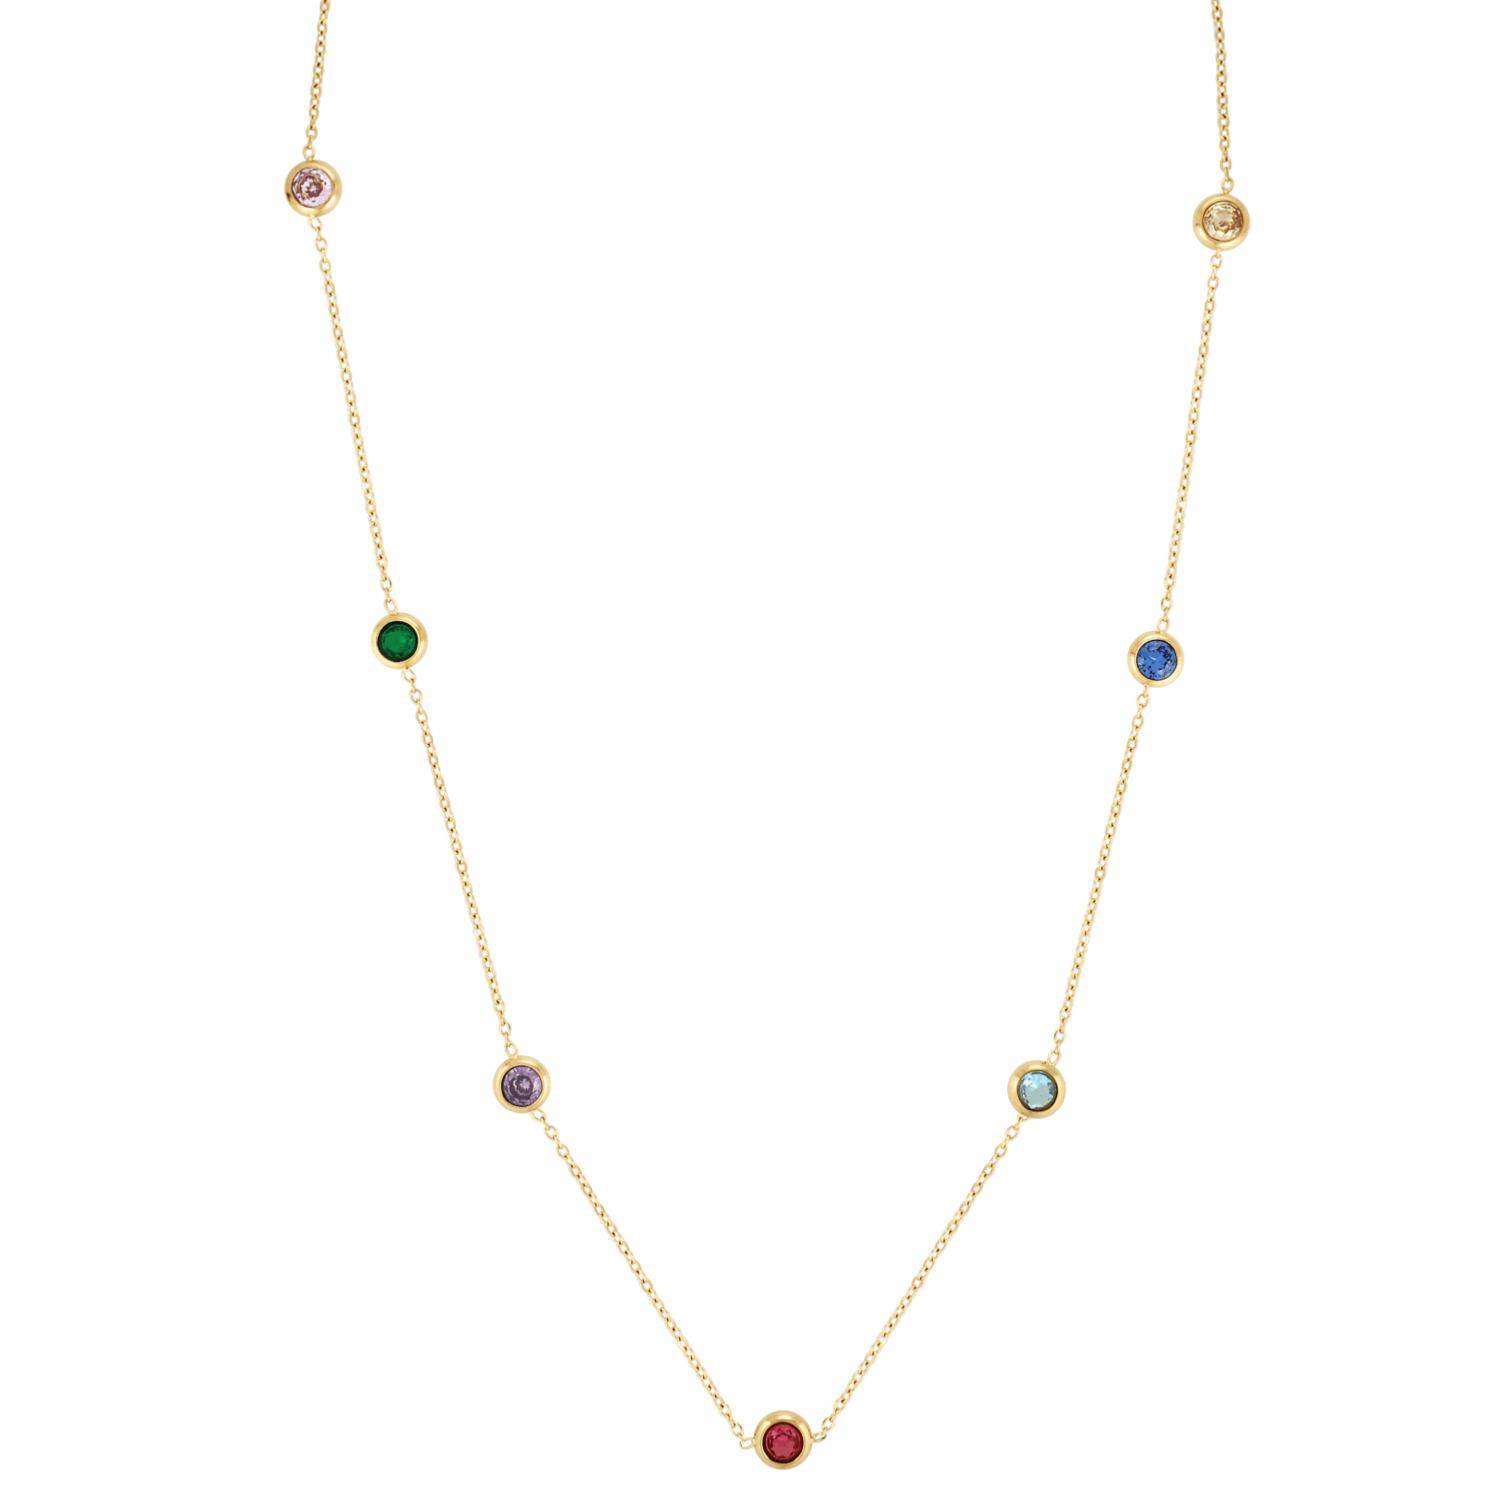 Sprinkle Necklace in gold 